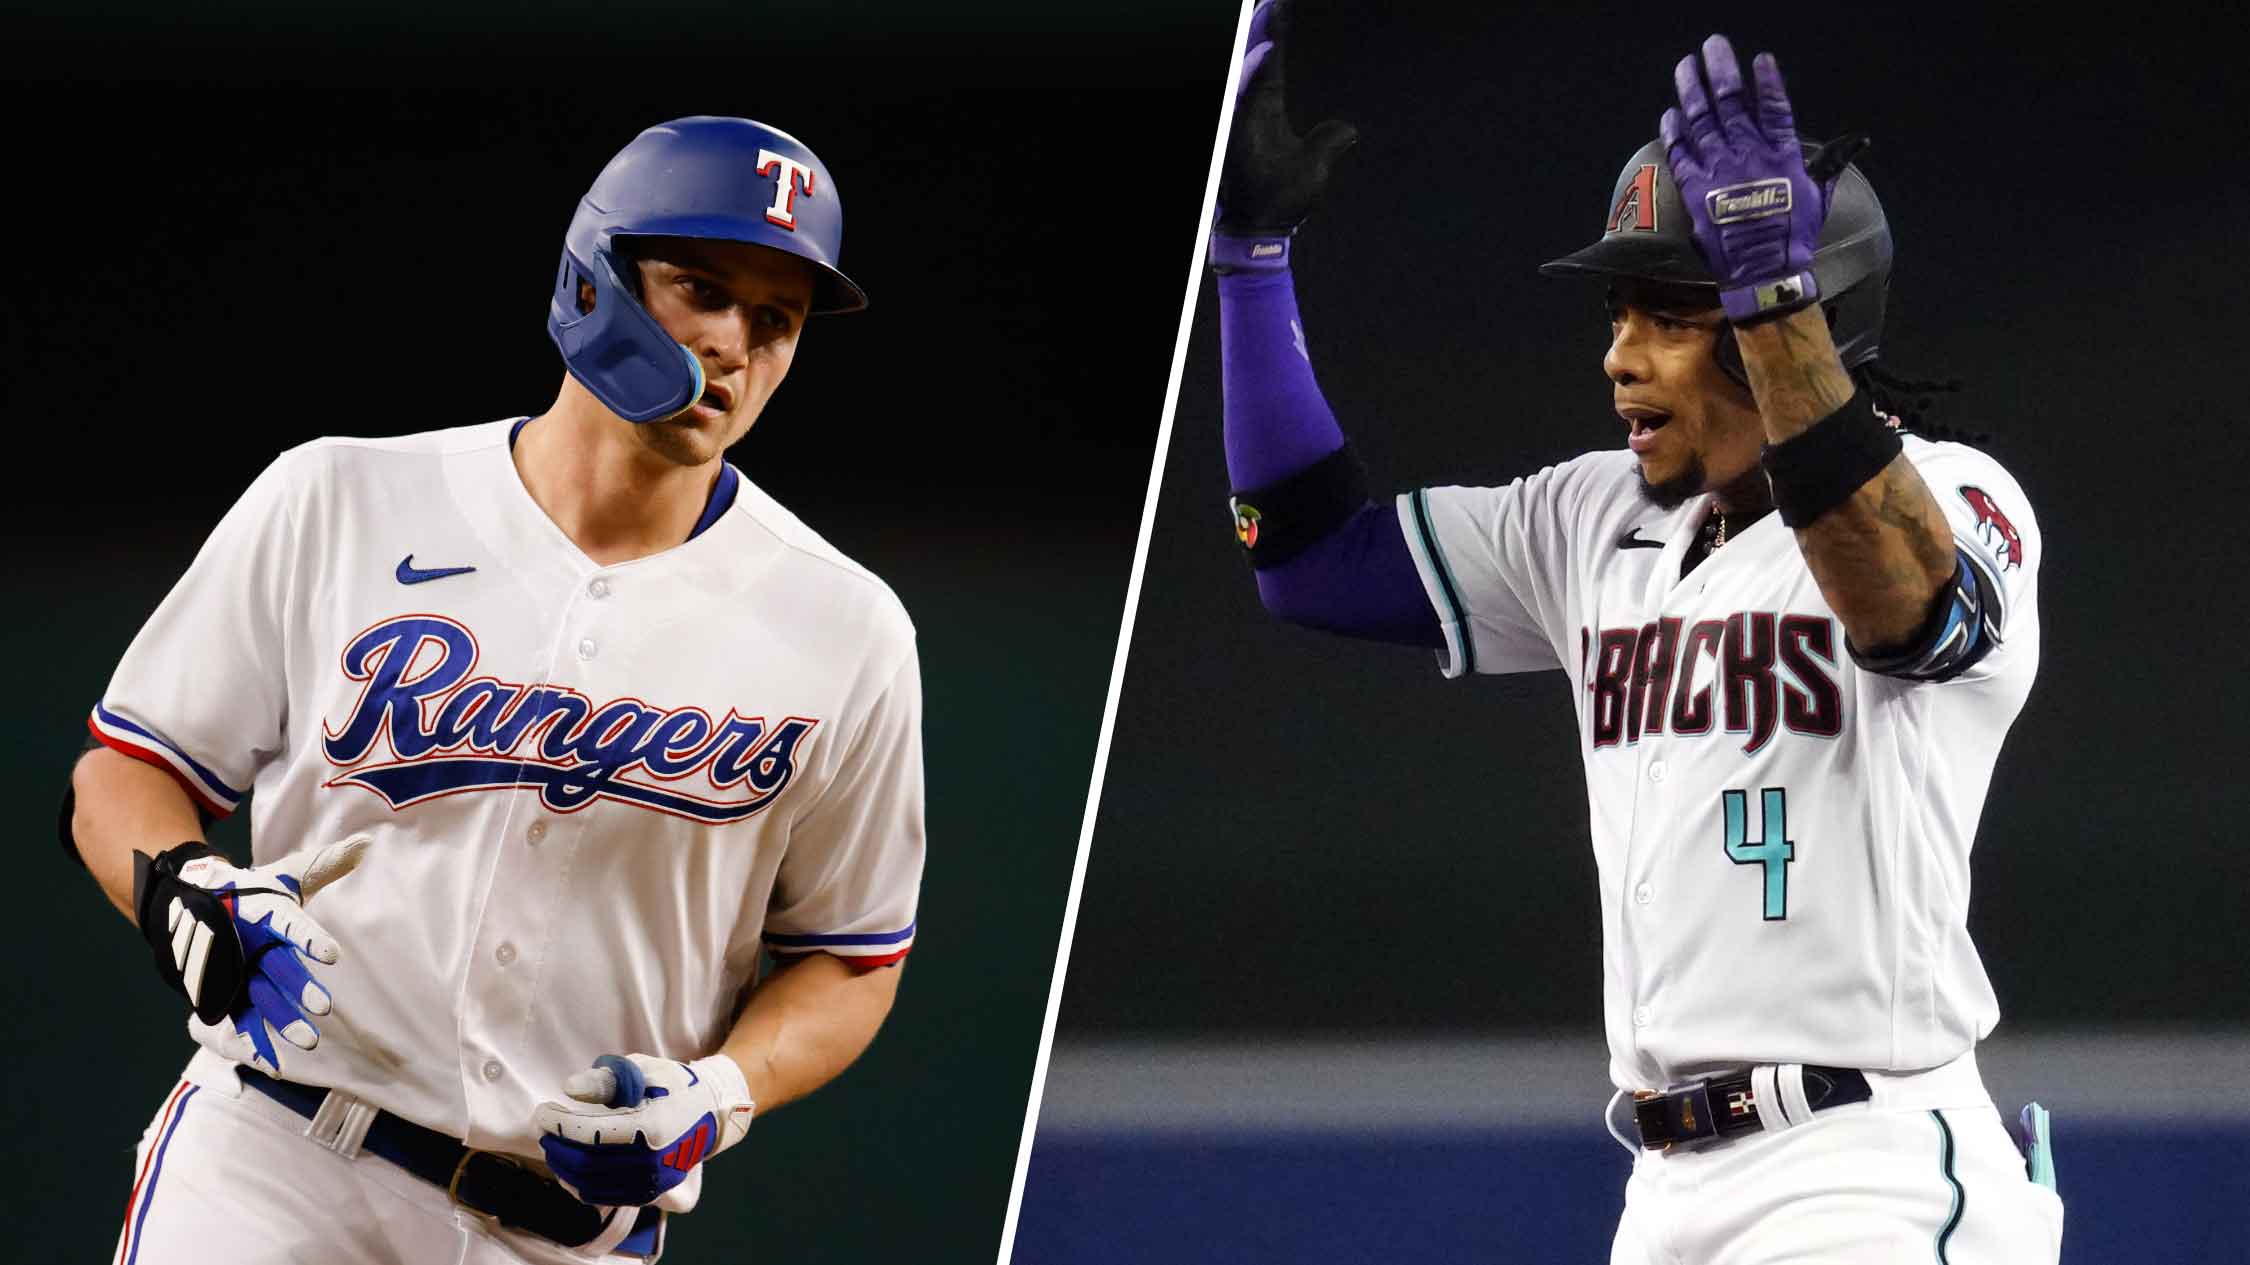 Odds and Picks on X: #MLB Best/Worst Records vs. the Run-Line Best ⚾️  Rangers 42-26 ⚾️ Orioles 42-26 ⚾️ Reds 42-27 ⚾️ D'Backs 41-28 ⚾️ Nationals  40-27 Worst ⚾️ Royals 22-46 ⚾️